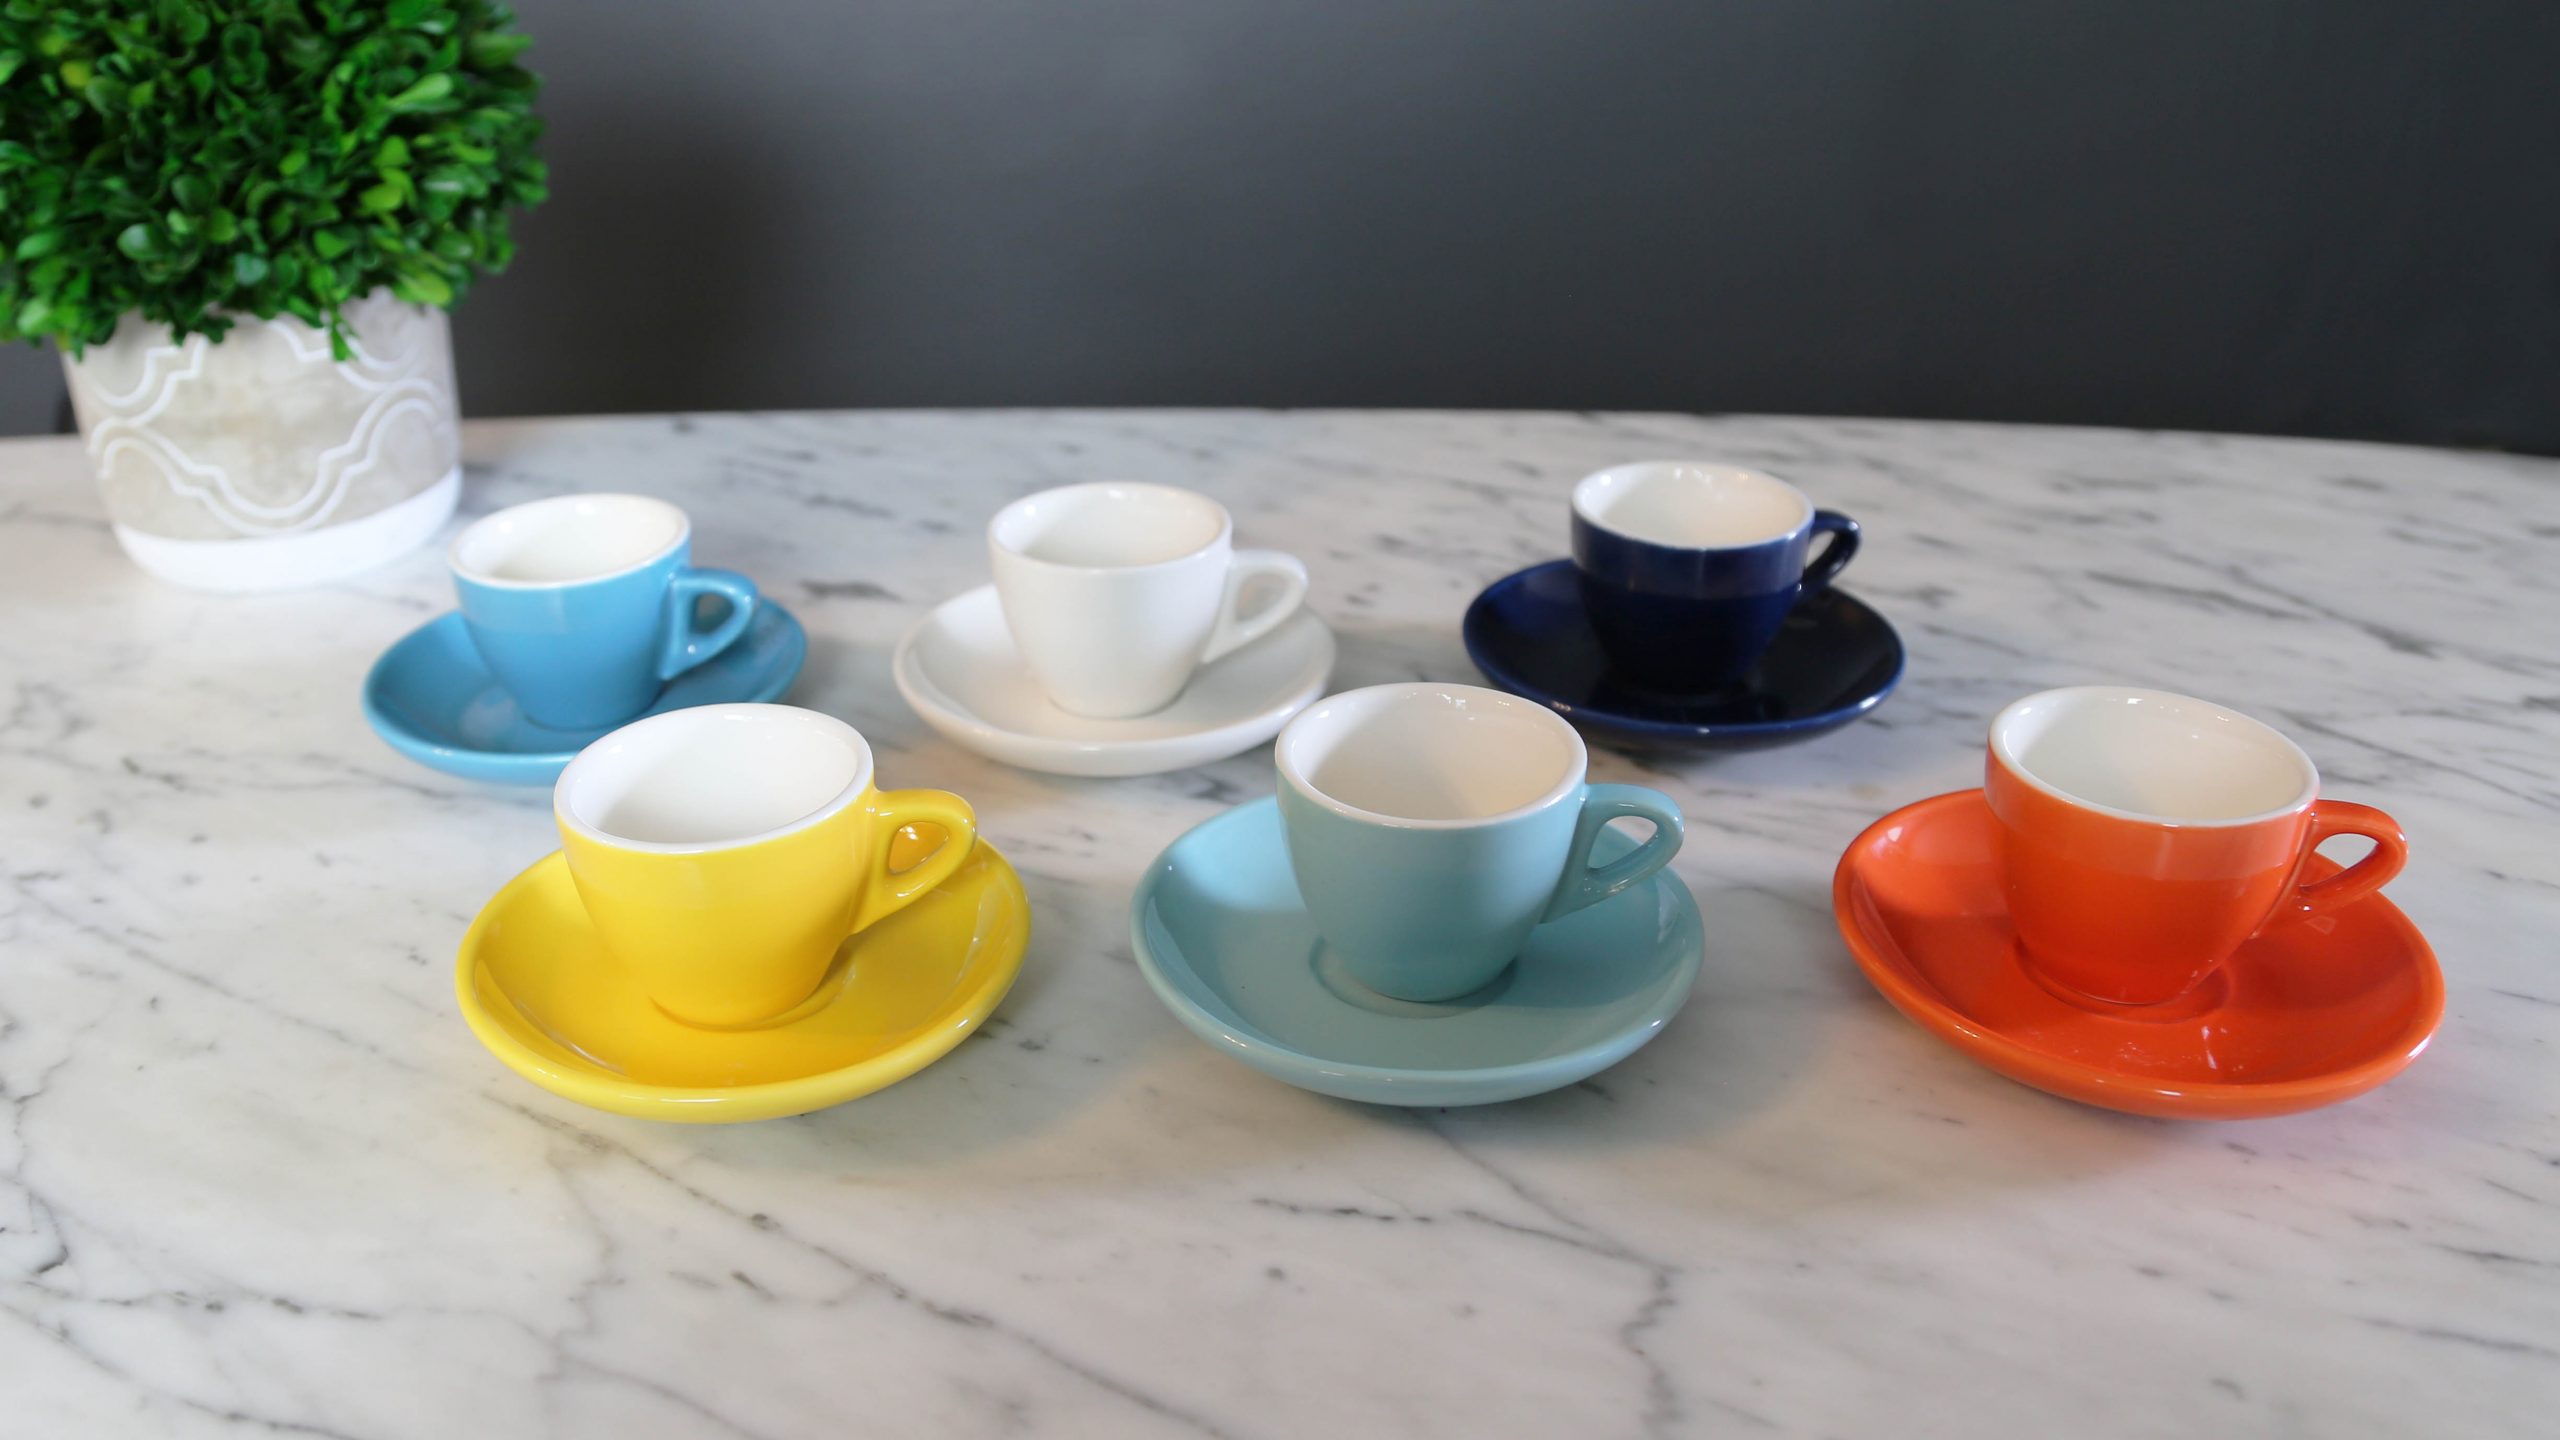 Hoomeet Ceramic Espresso Cups and Saucers, Set Of 6